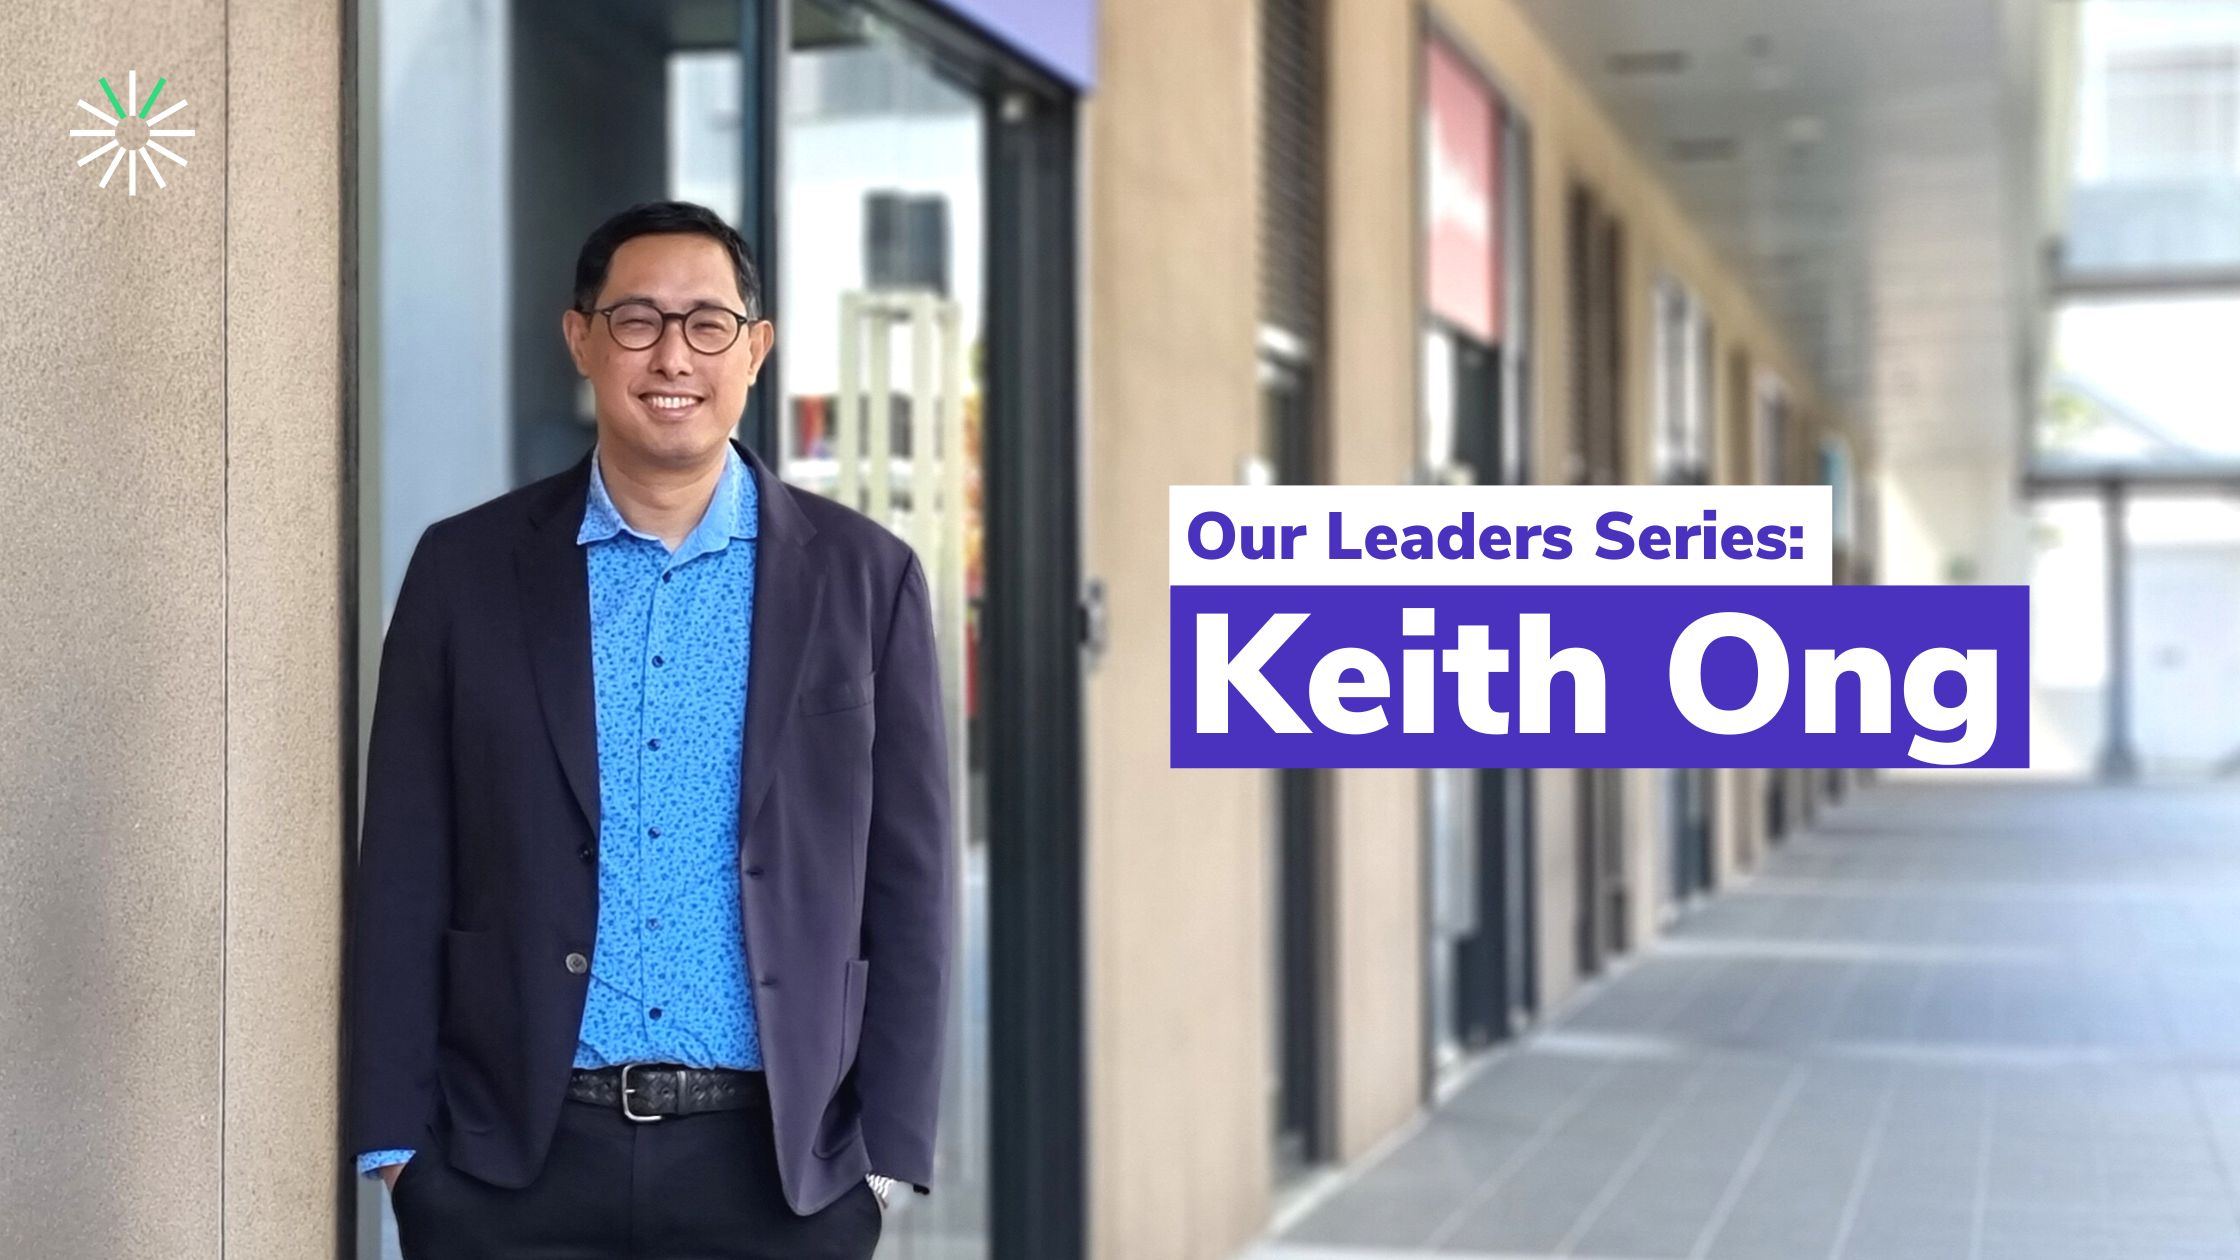 Our Leaders Series: Keith Ong